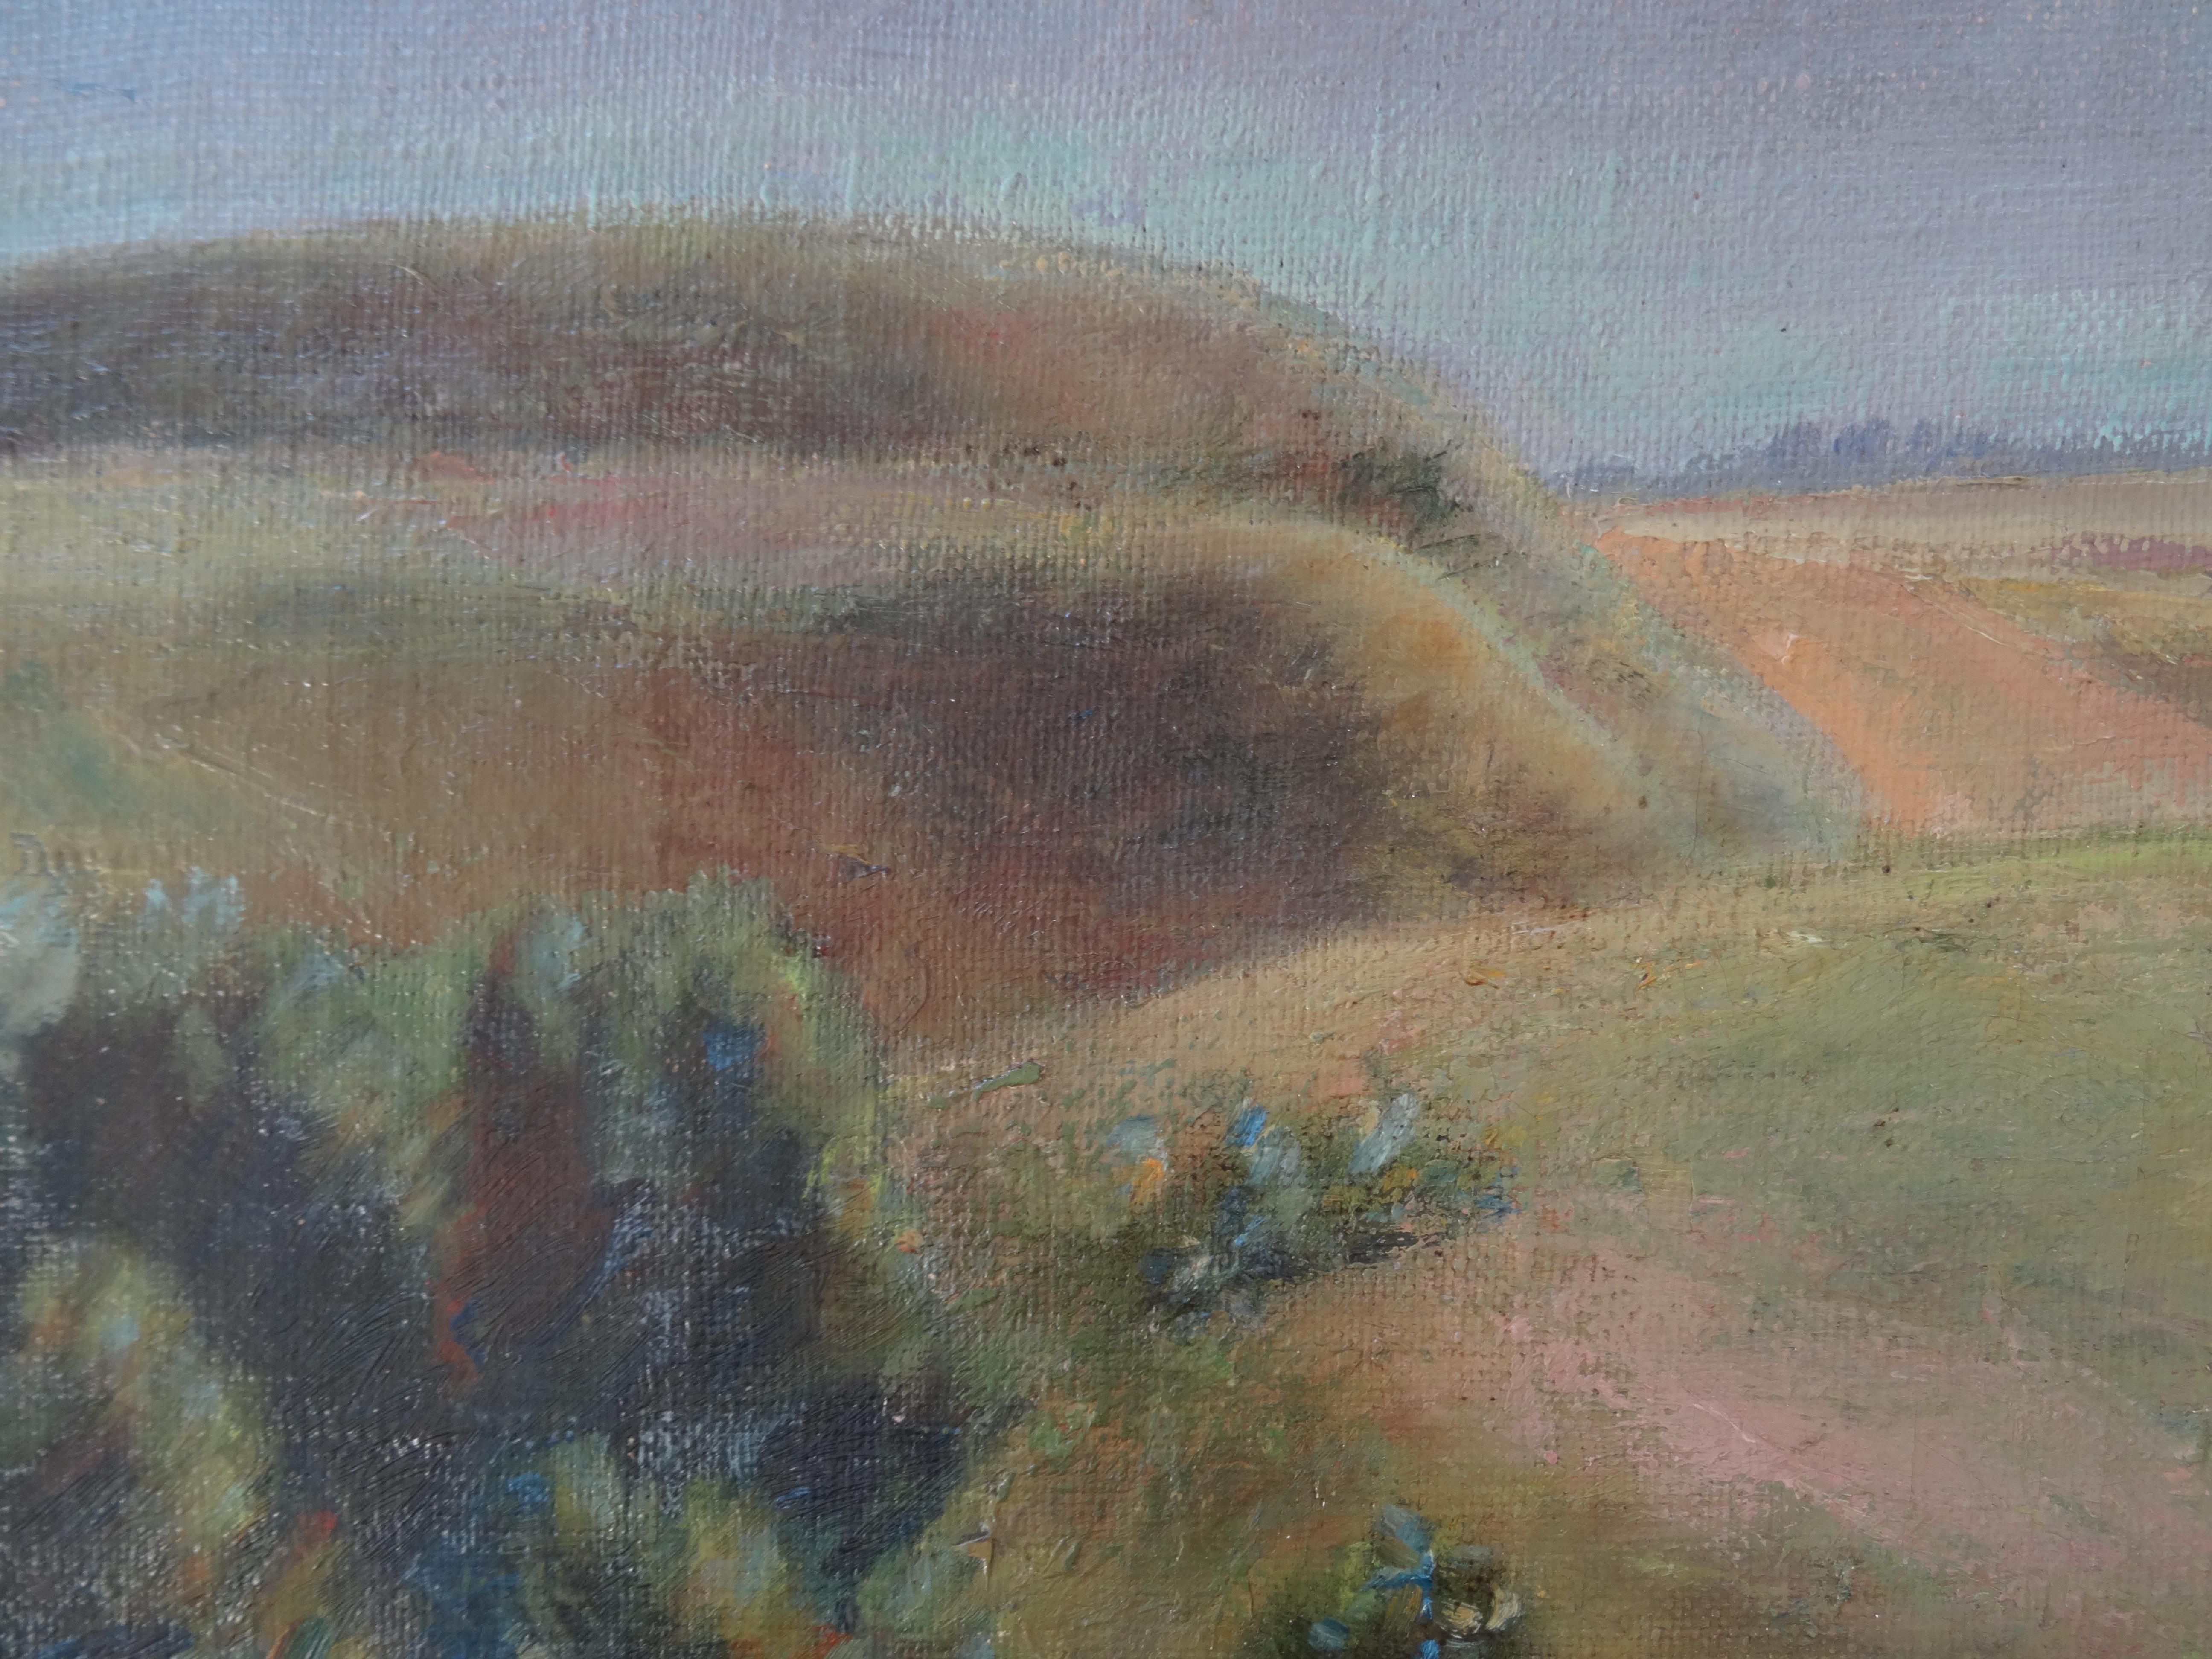 Hills. Oil on canvas, 68x99 cm

Summer landscape with hills